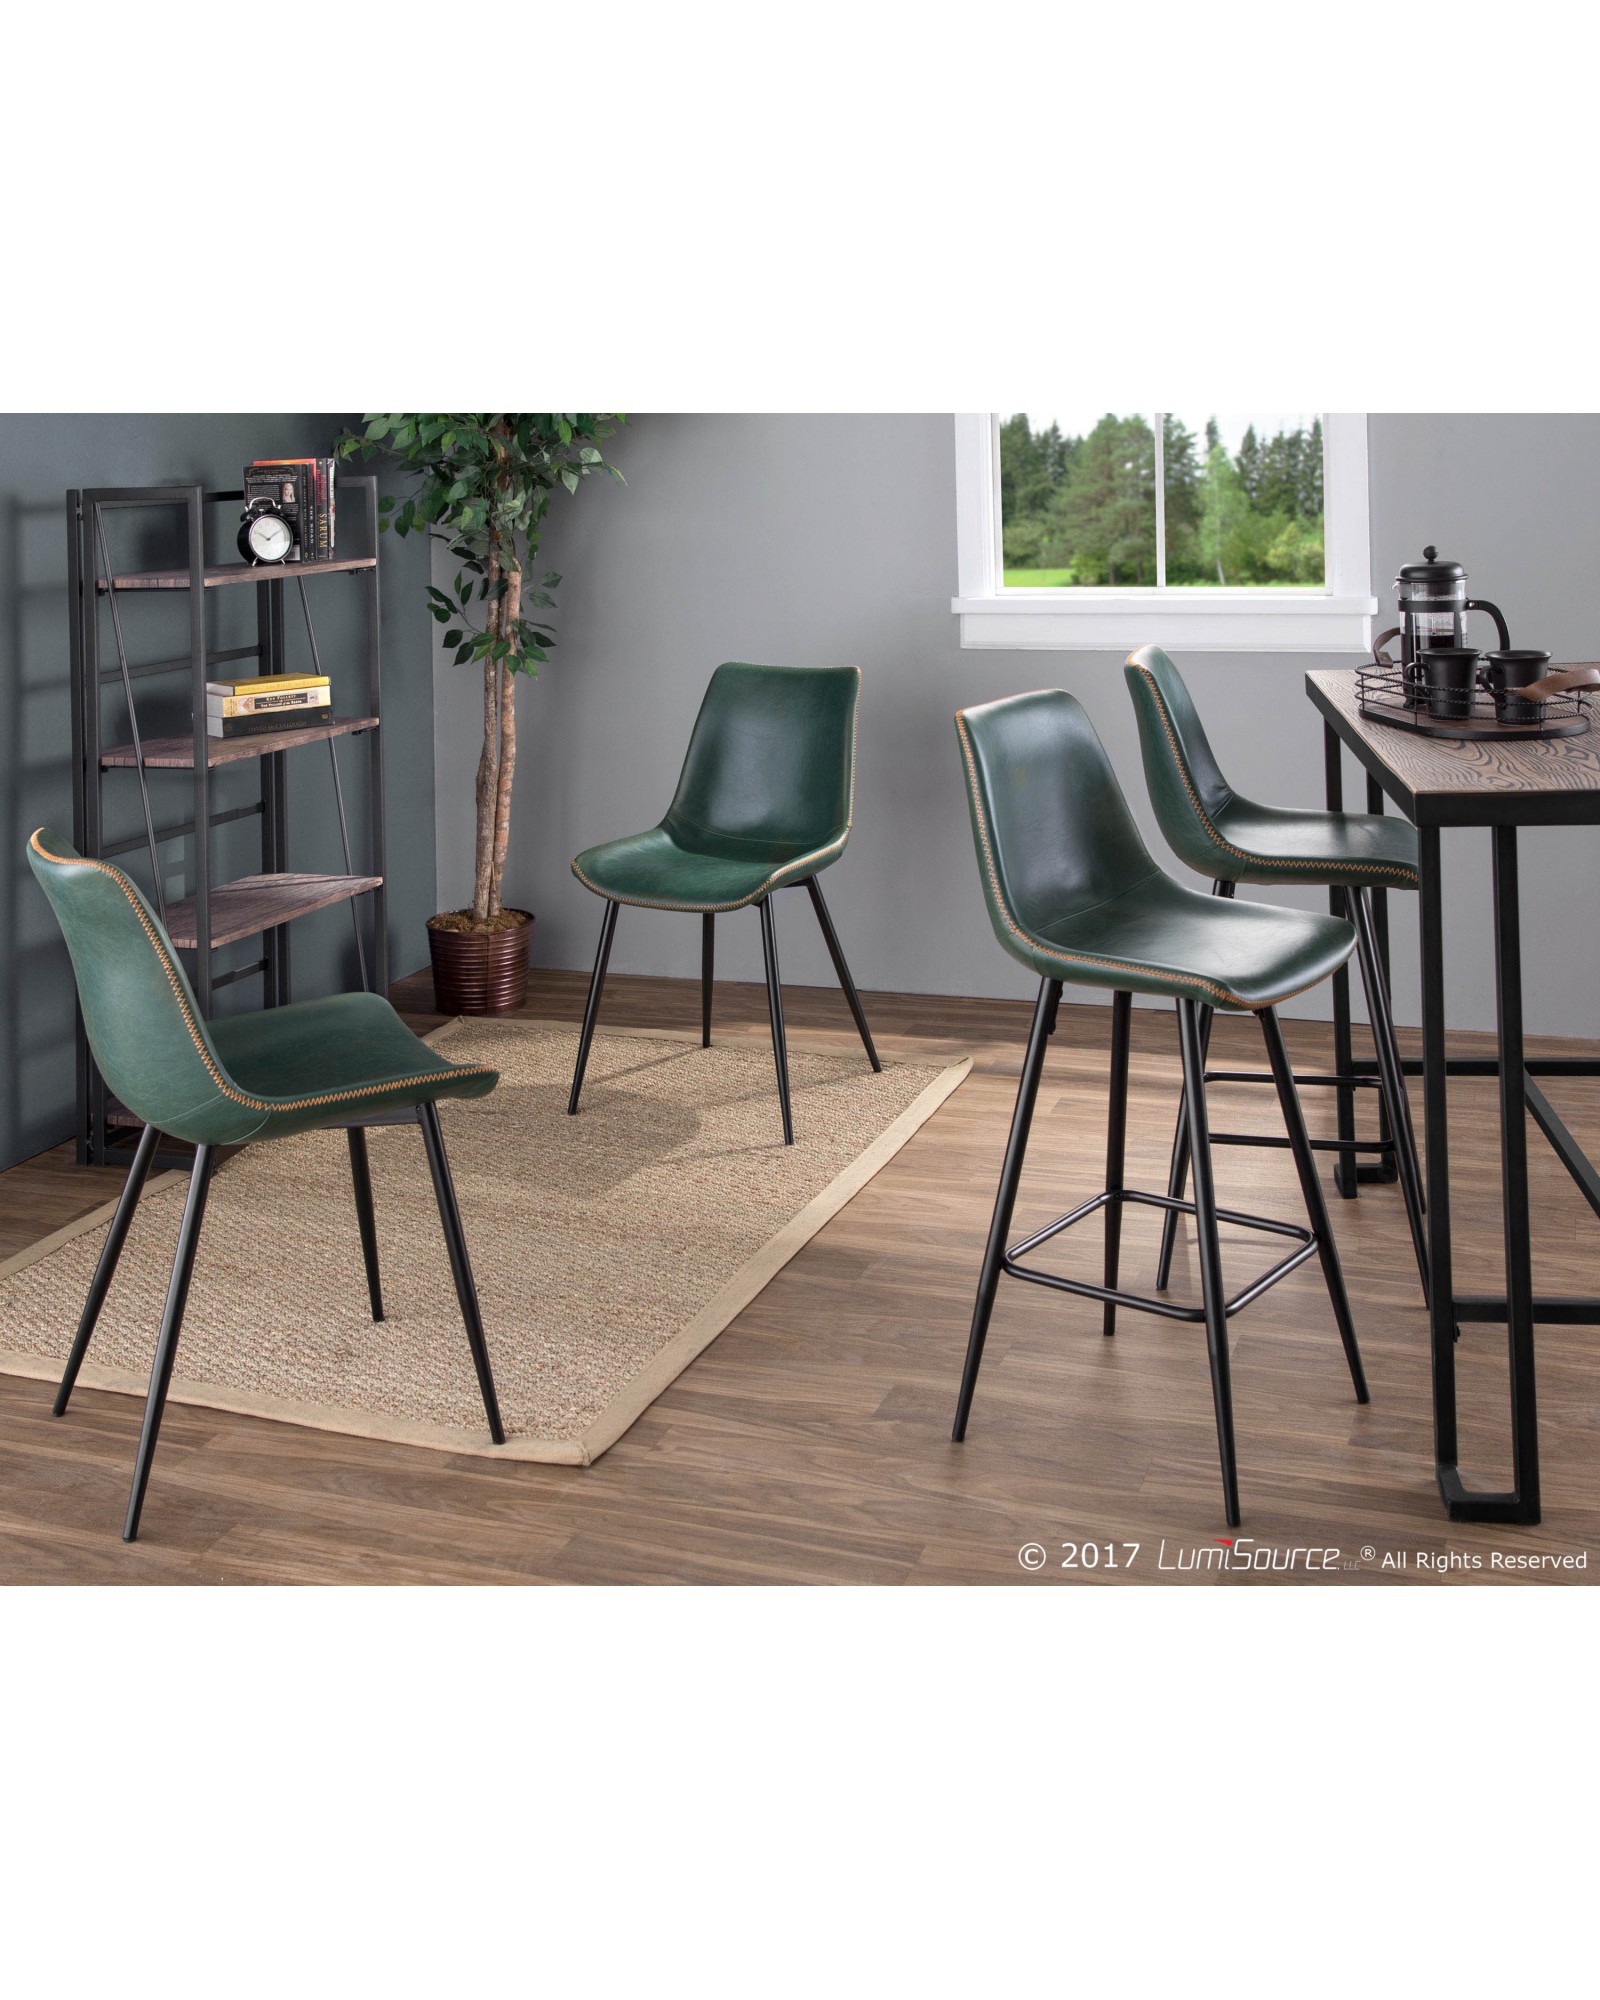 Durango Contemporary Dining Chair in Black with Green Vintage Faux Leather - Set of 2